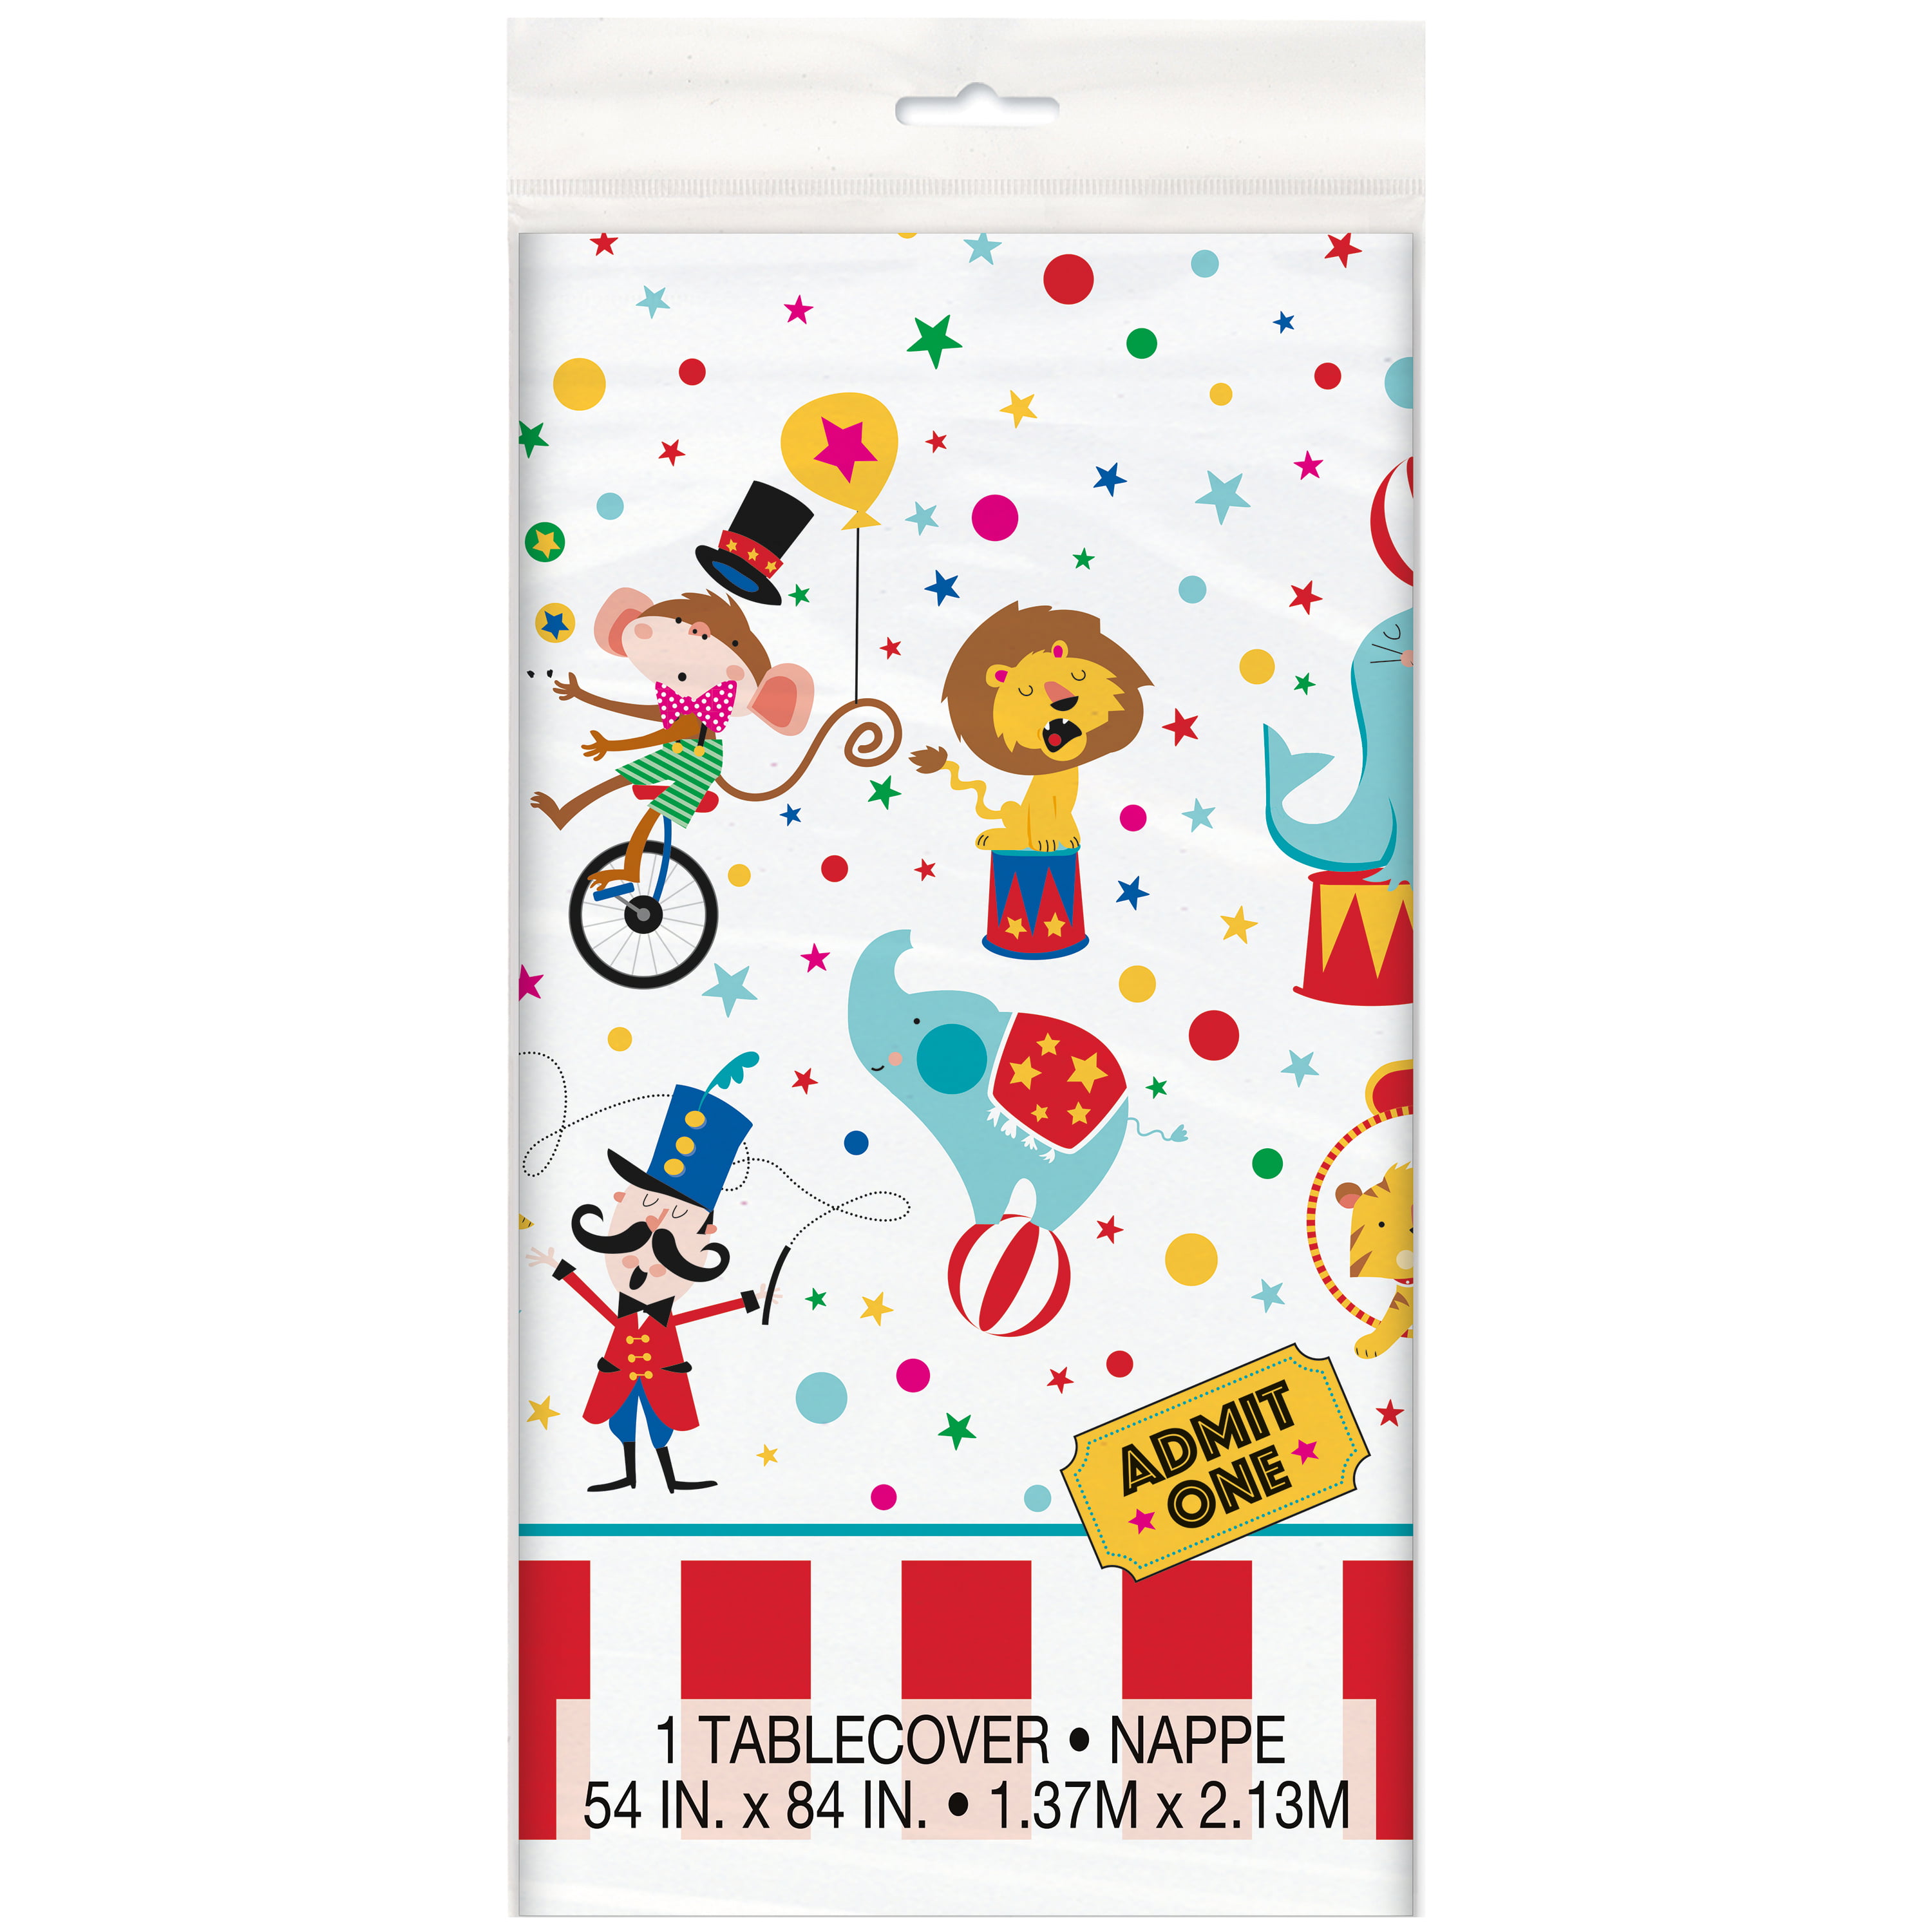 Whimsical Circus Theatre Ticket Admit One Movie Night Tablecloth Rectangle Stain Resistant Spillproof and Washable Table Cover for Outdoor Picnic Kitchen and Holiday Dinner 60X108